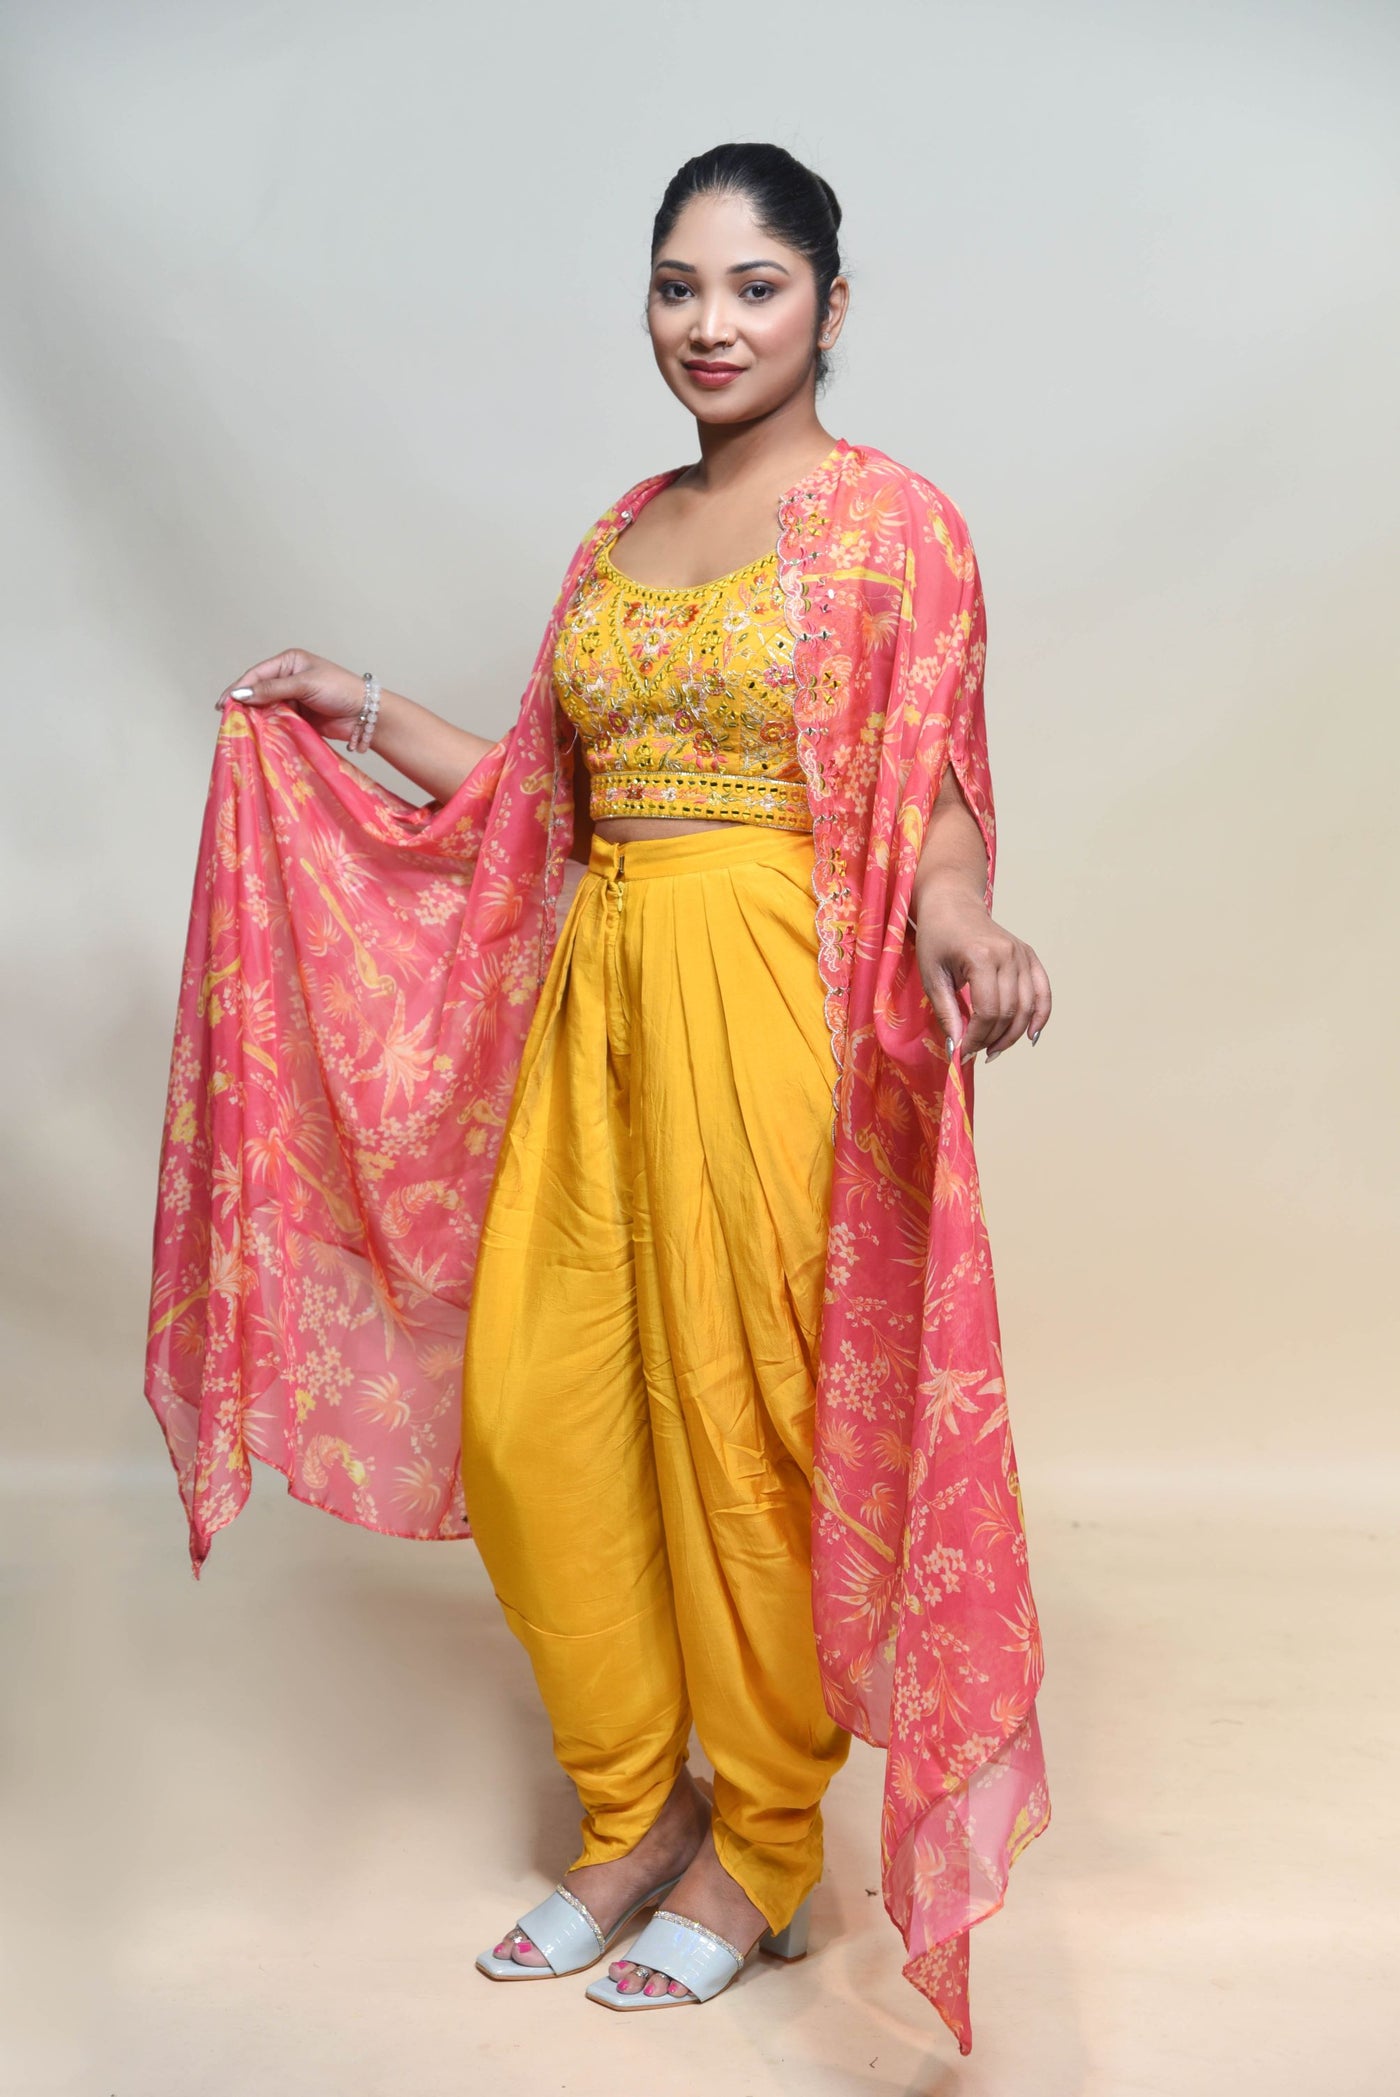 Beautiful Silk Kurta with dhoti pant. Embellished with hand embroidery. |  Indian designer wear, Indian wear, Fashion